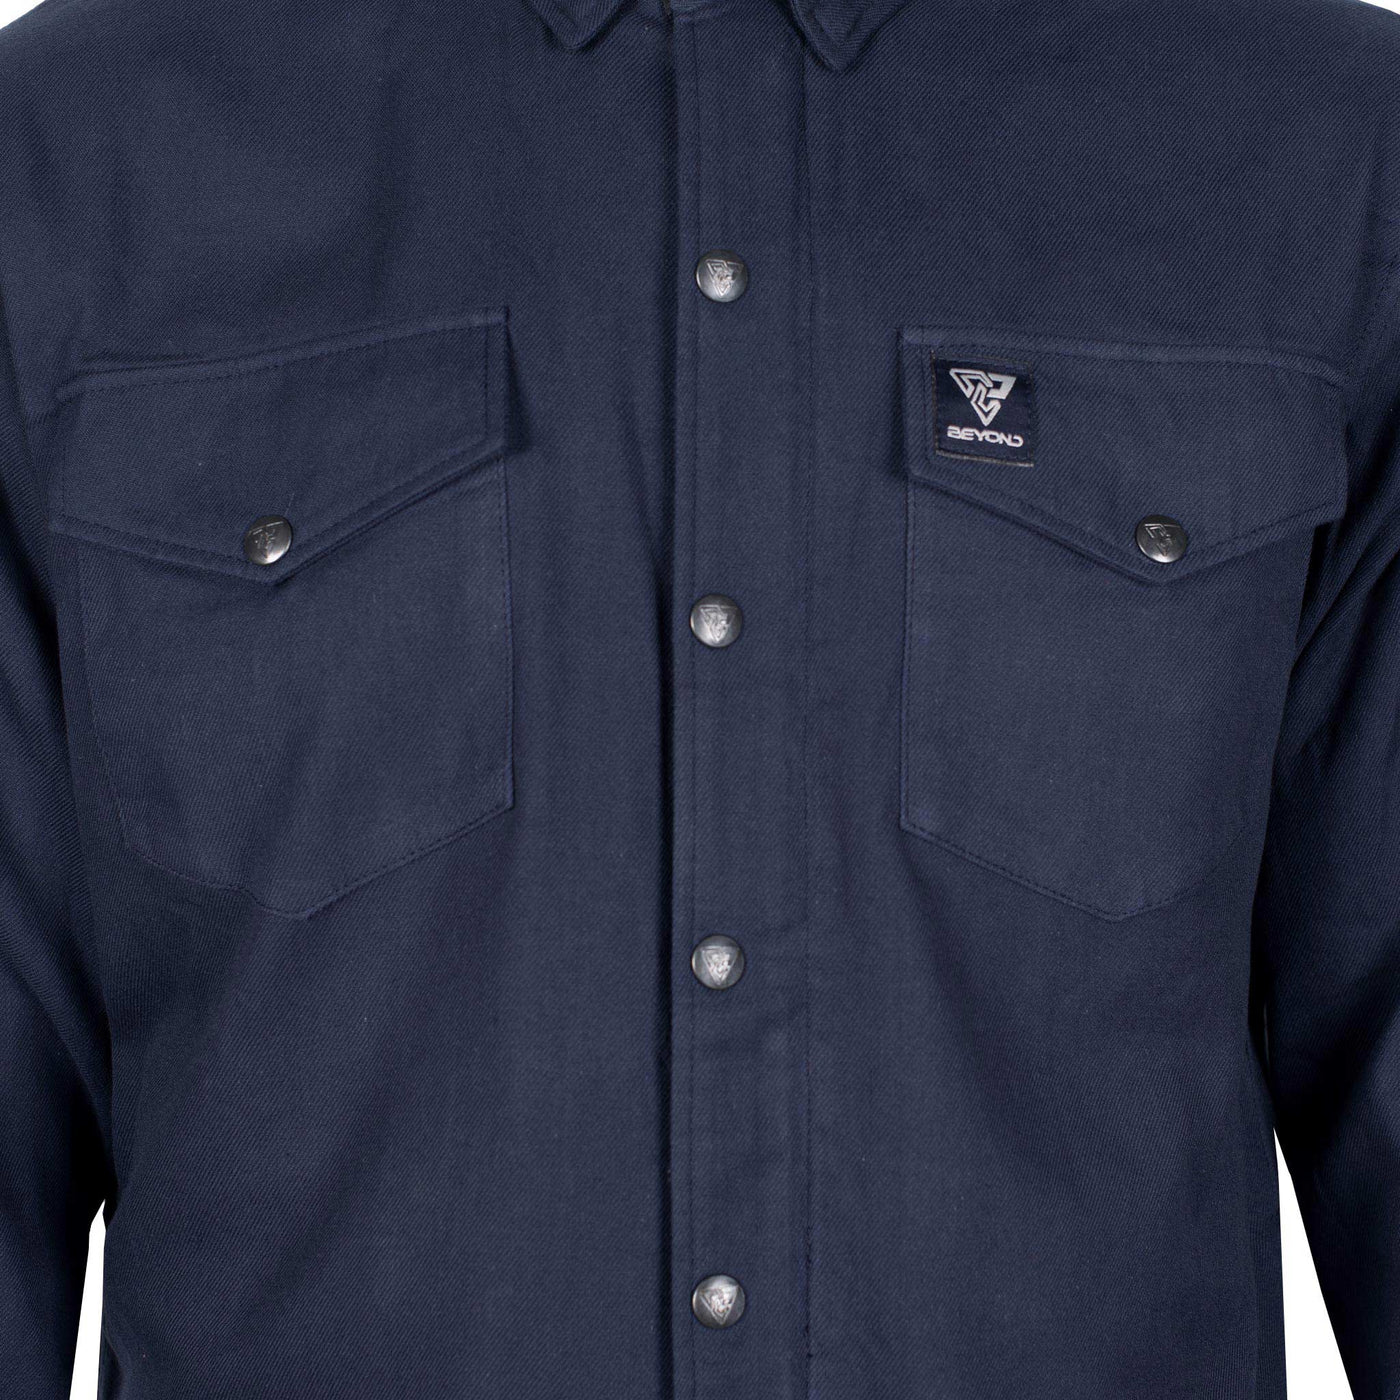 Protective Flannel Shirt with Pads - Dark Navy Blue Solid